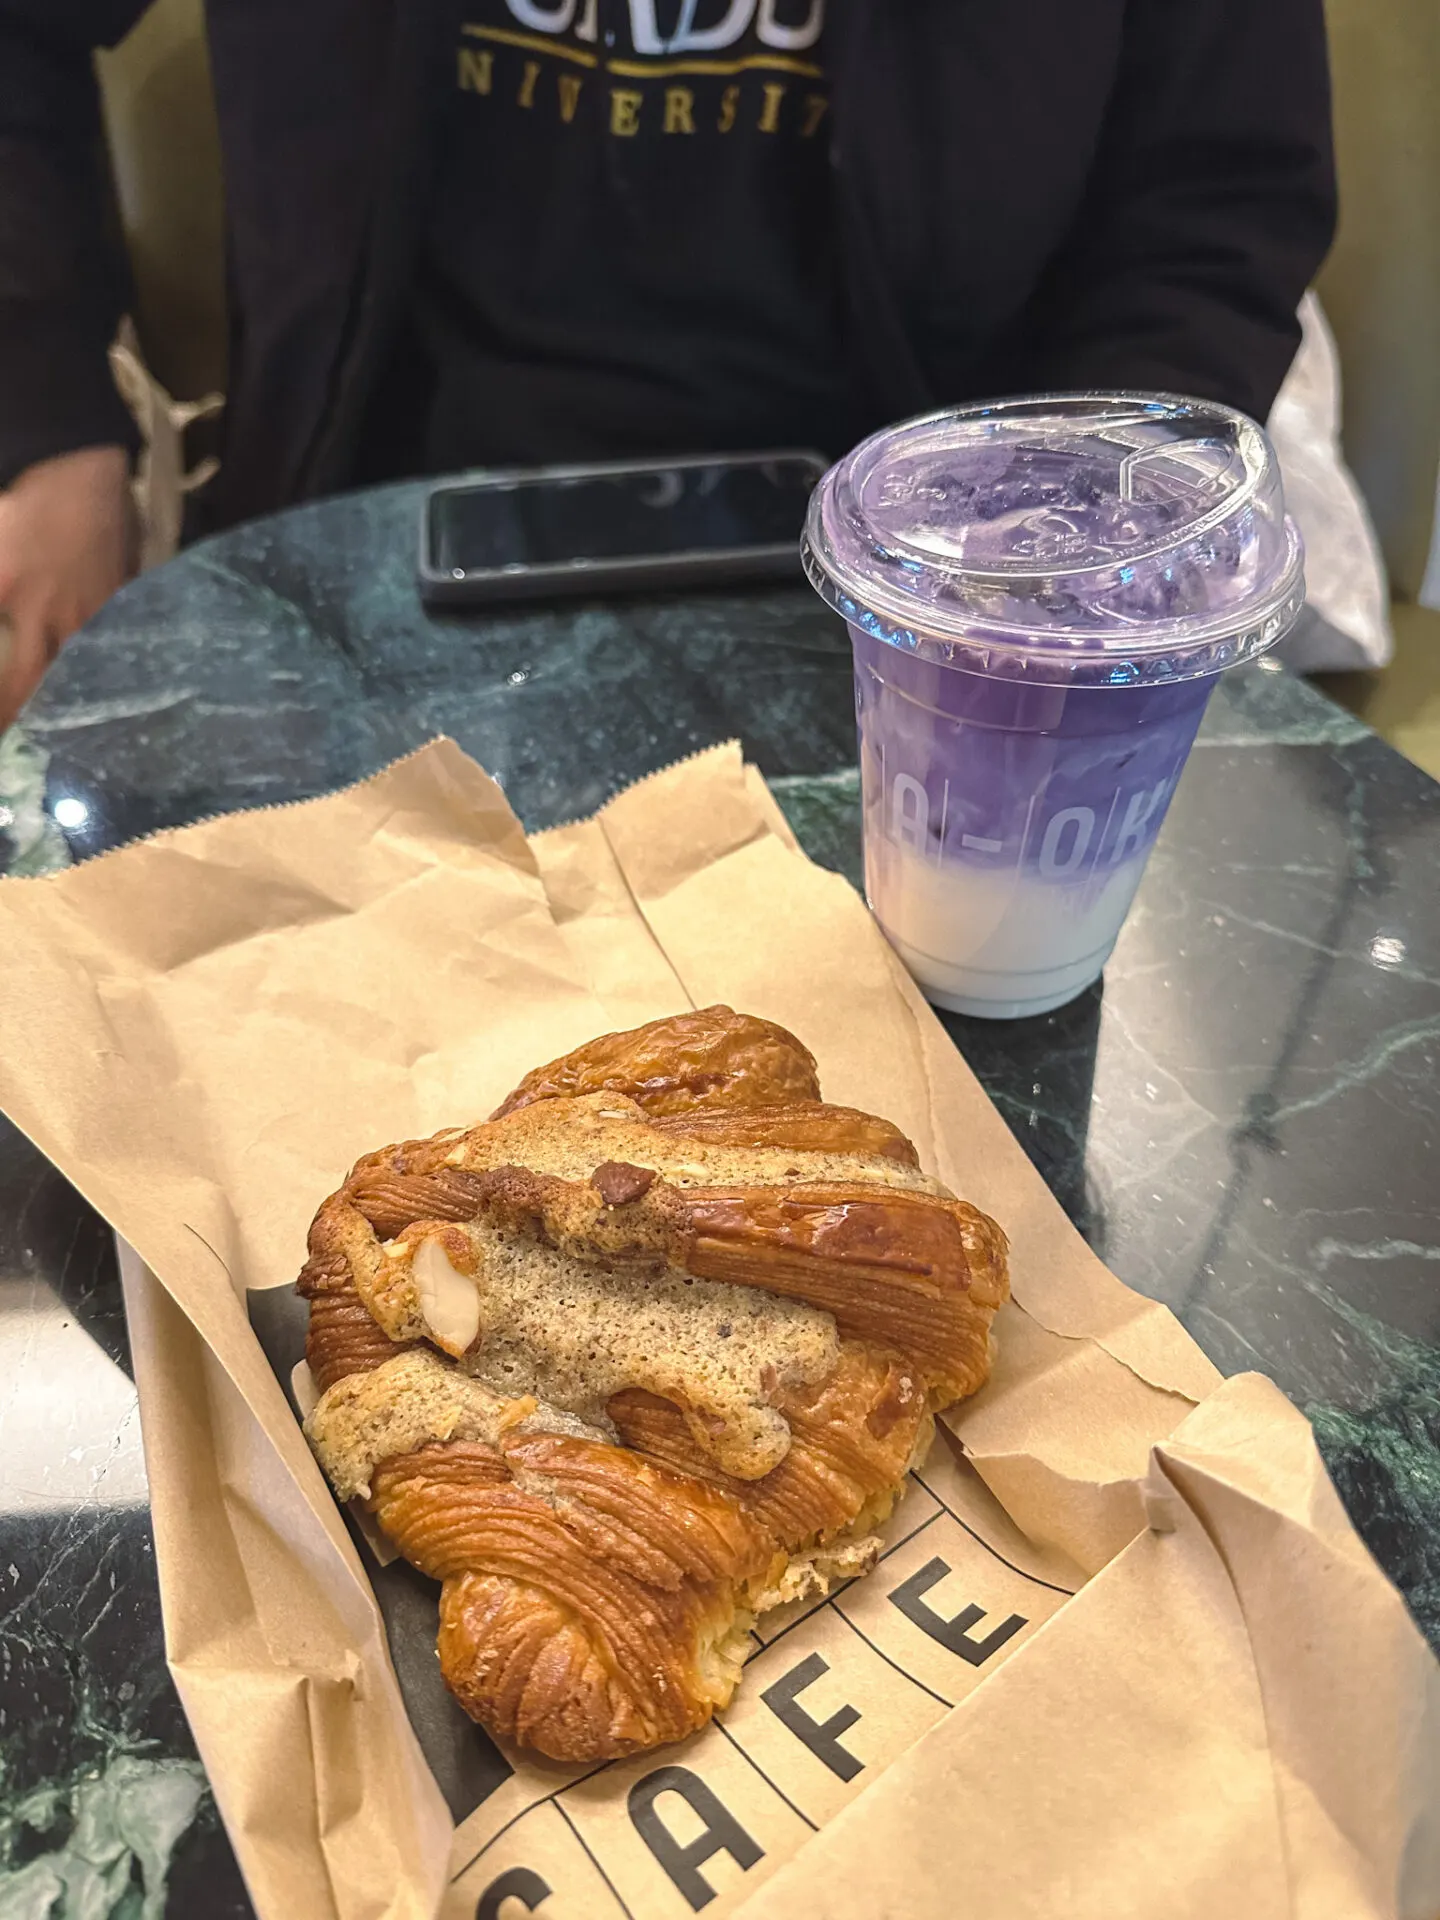 Purple Pop Latte and almond croissant from A-OK Cafe inside Aritzia at Markville Mall in Markham, Ontario